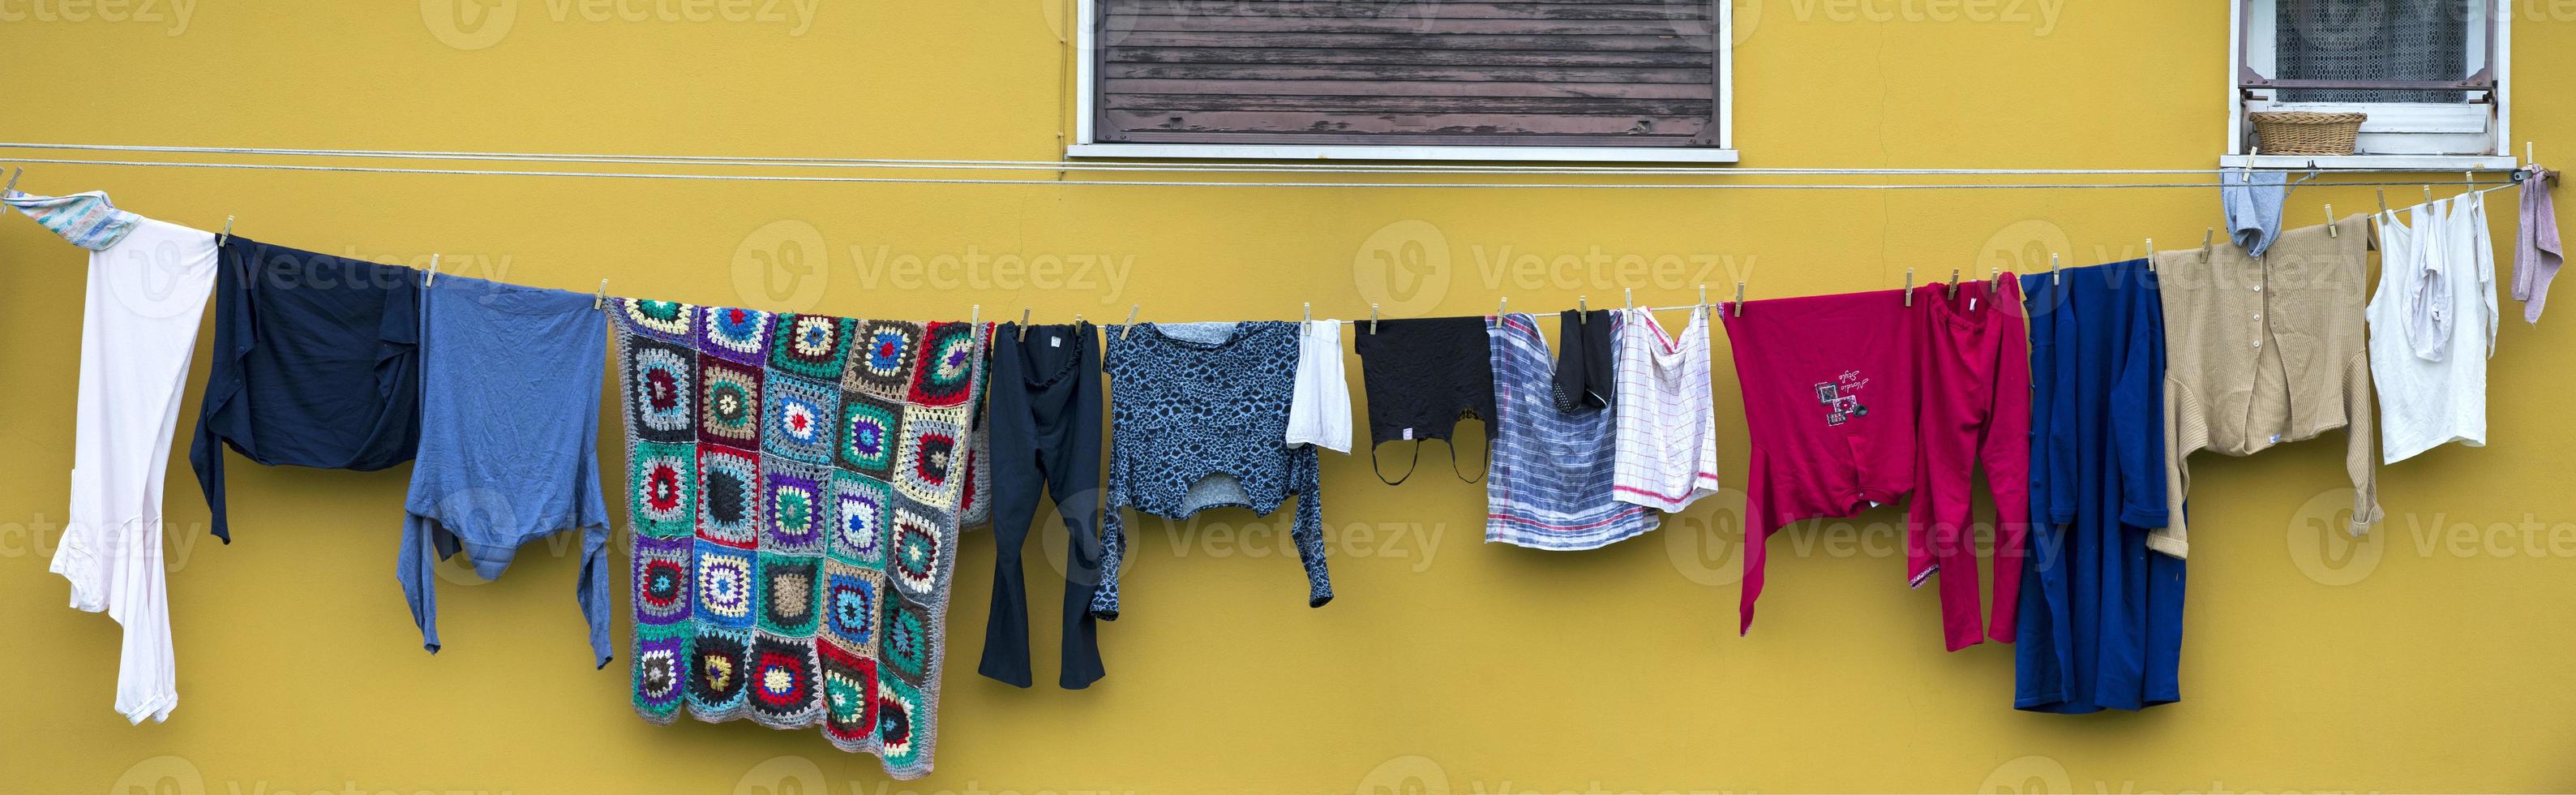 clothes hanging outside. photo